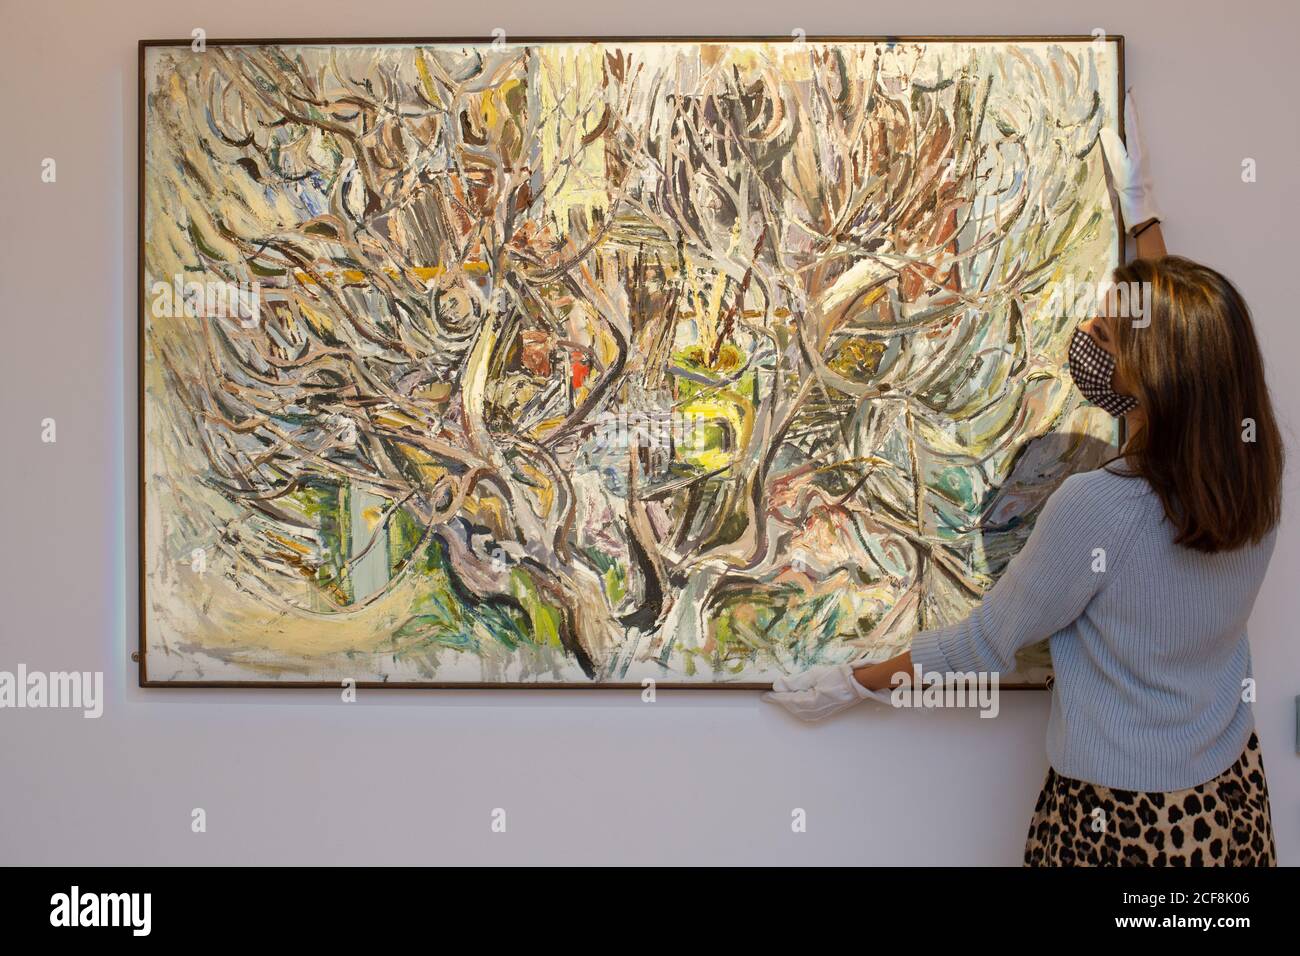 London, UK, September 4, 2020: Sotheby’s annual Irish Art sale is expected to bring around £3.2 million. It includes Patrick Swift’s Gnarled Olive Tree est. £8,000-12,000 Credit: Andy Sillett/Alamy Live News Stock Photo